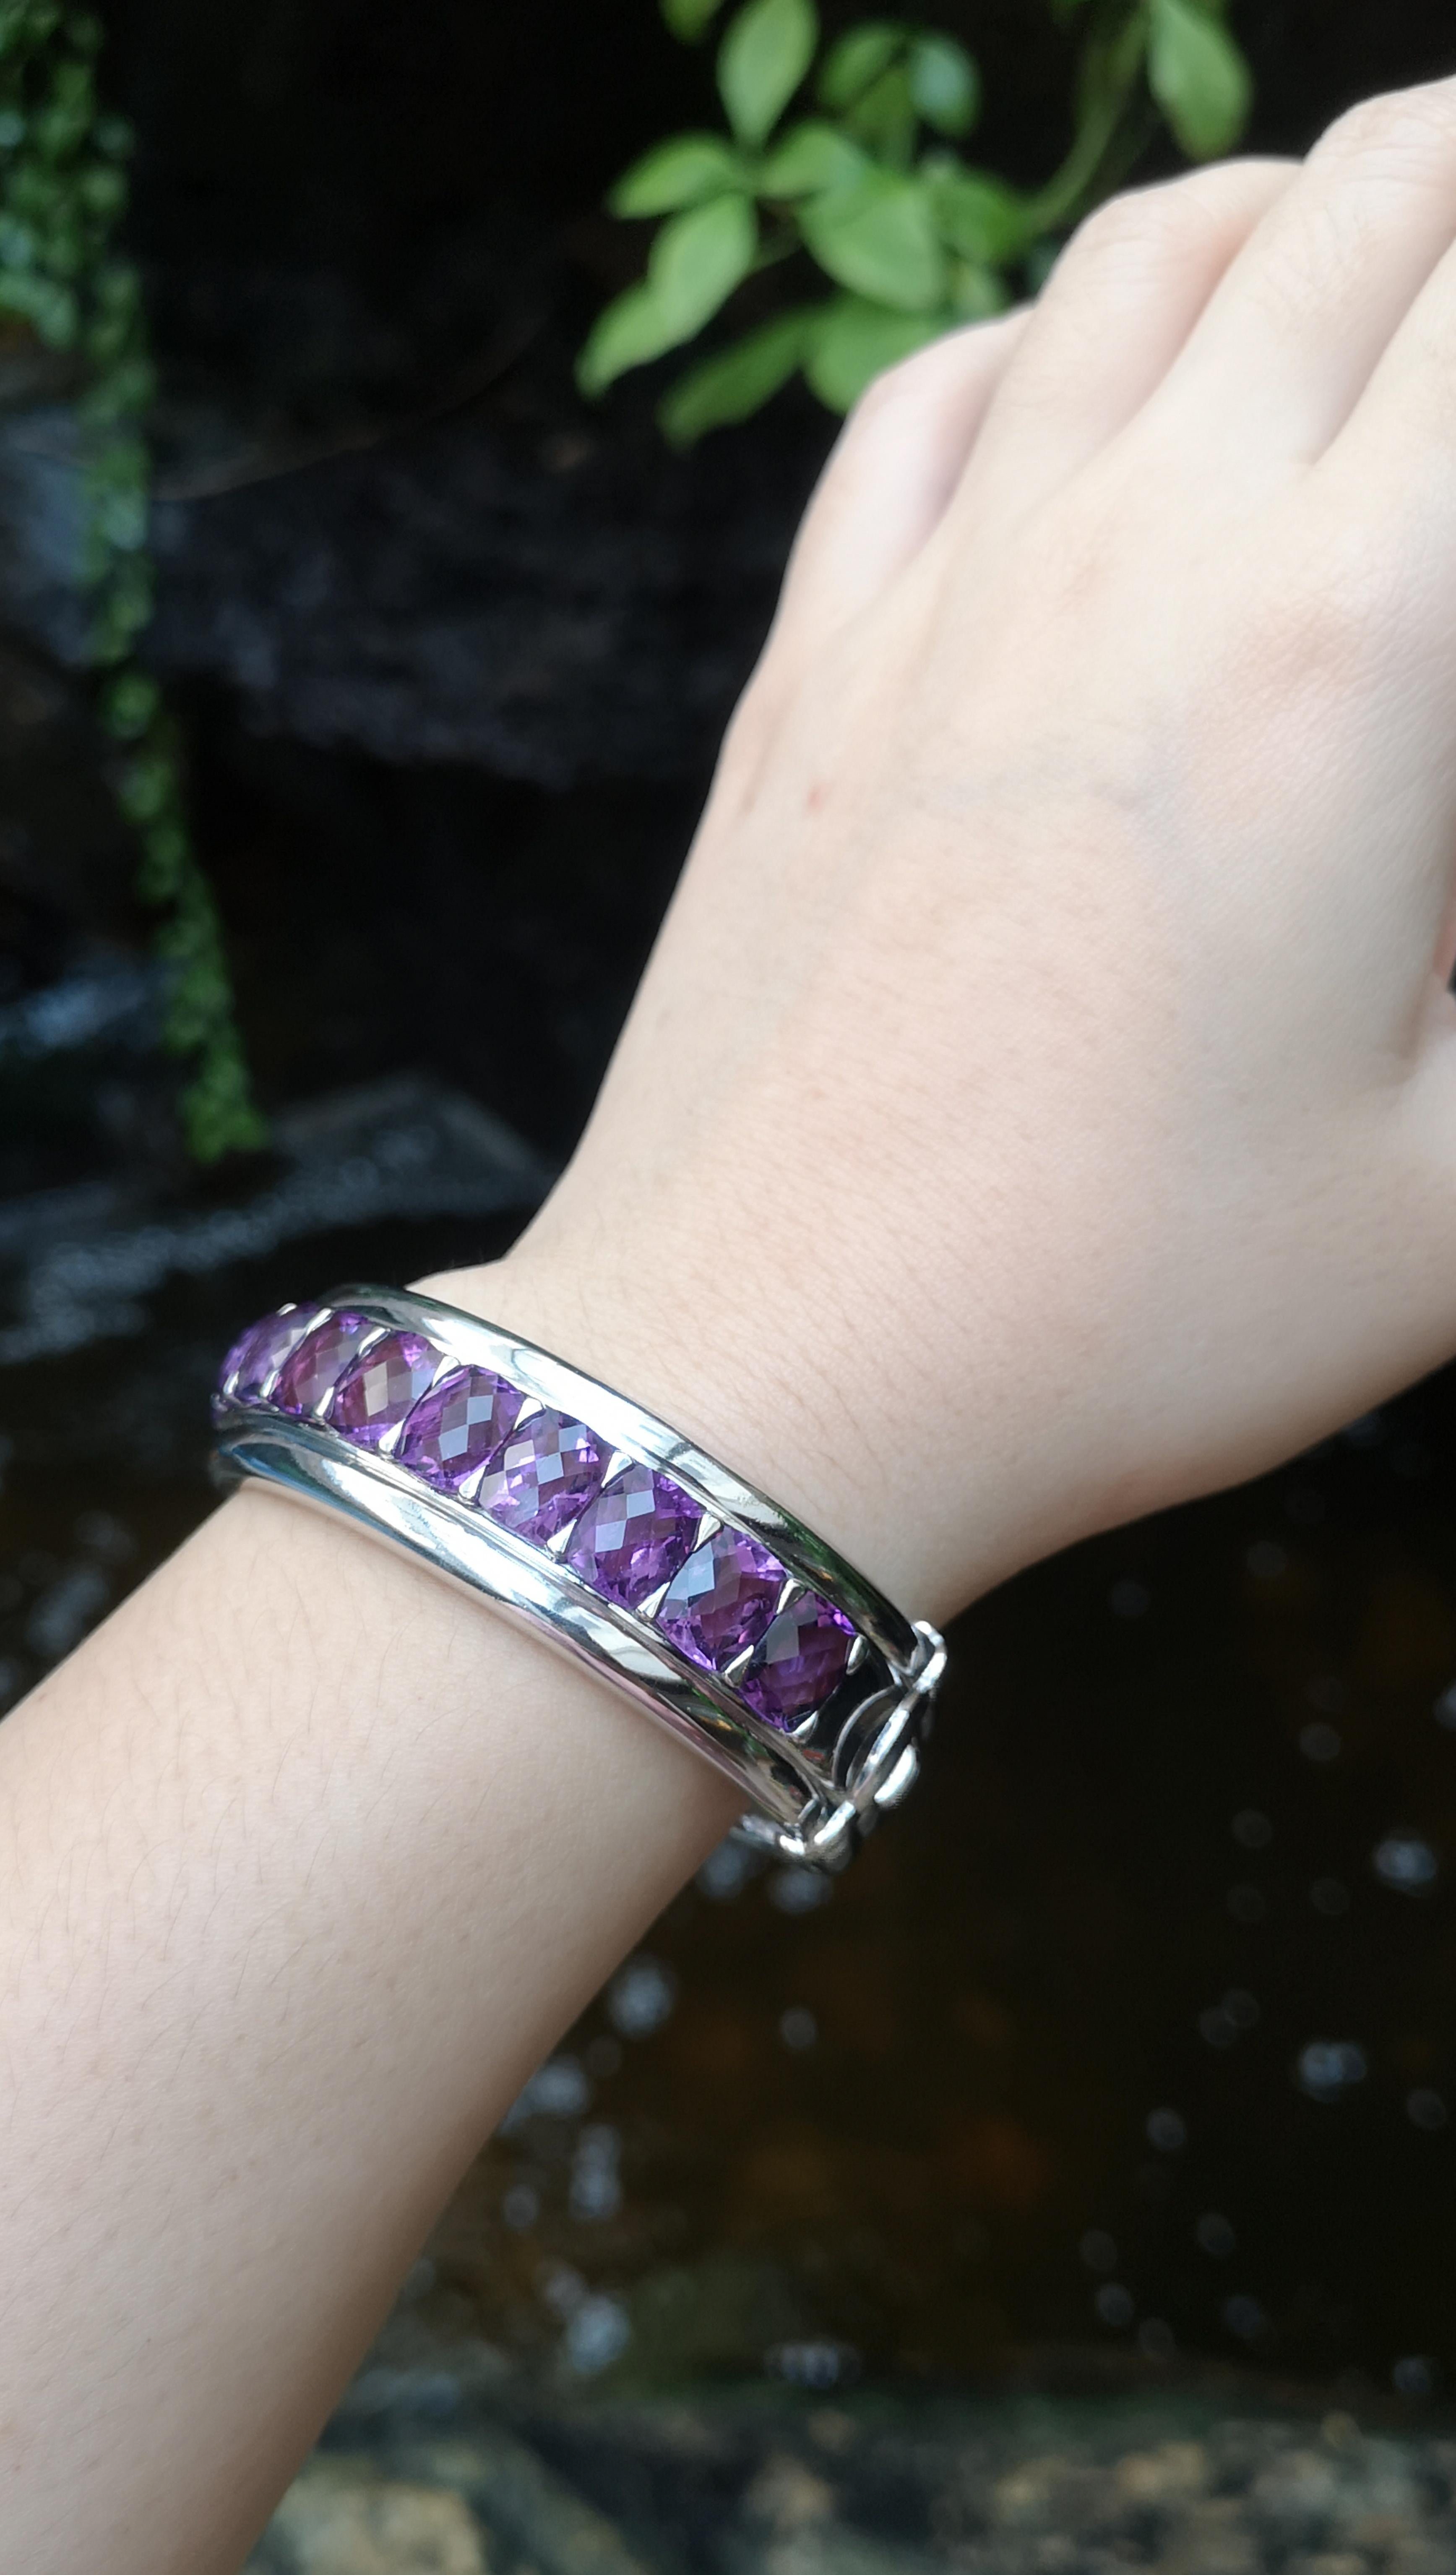 Amethyst 31.18 carats Bangle set in Silver Settings

Diameter:  6.7 cm 
Length: 2.0 cm
Total Weight: 57.28 grams

*Please note that the silver setting is plated with rhodium to promote shine and help prevent oxidation.  However, with the nature of